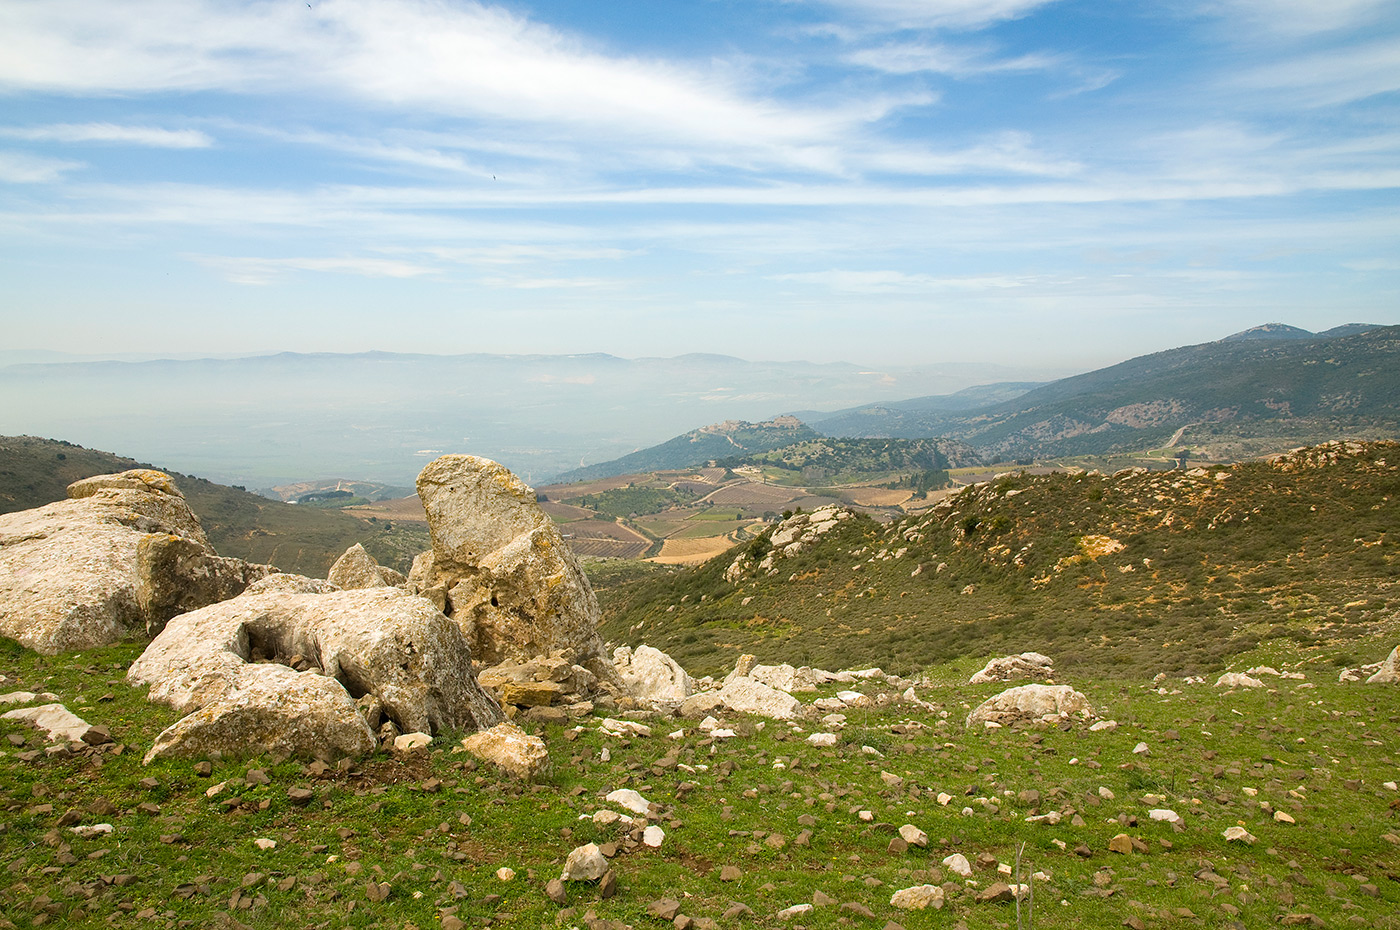 The Golan Heights